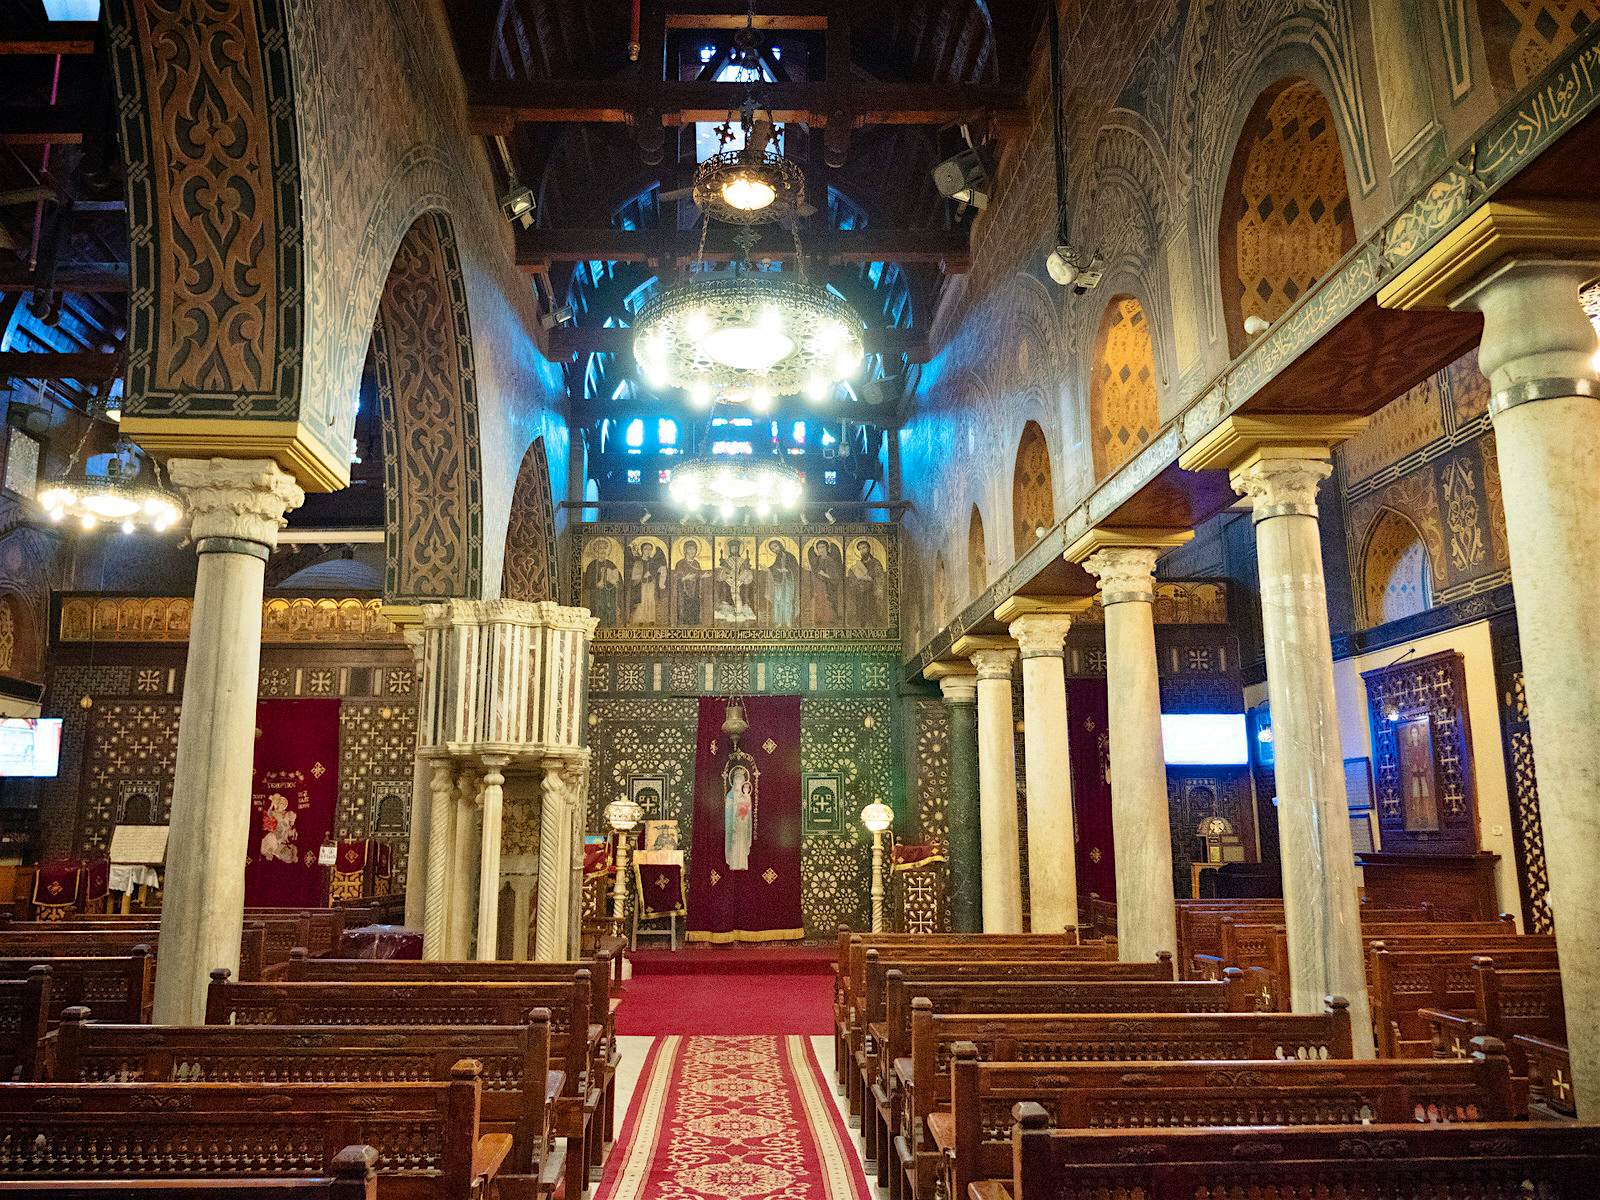 The church interior is dominated by gold patterns on the walls, contrasting with a predominately red carpet and dark wood chairs. Two large circular lights hang down above the central aisle.